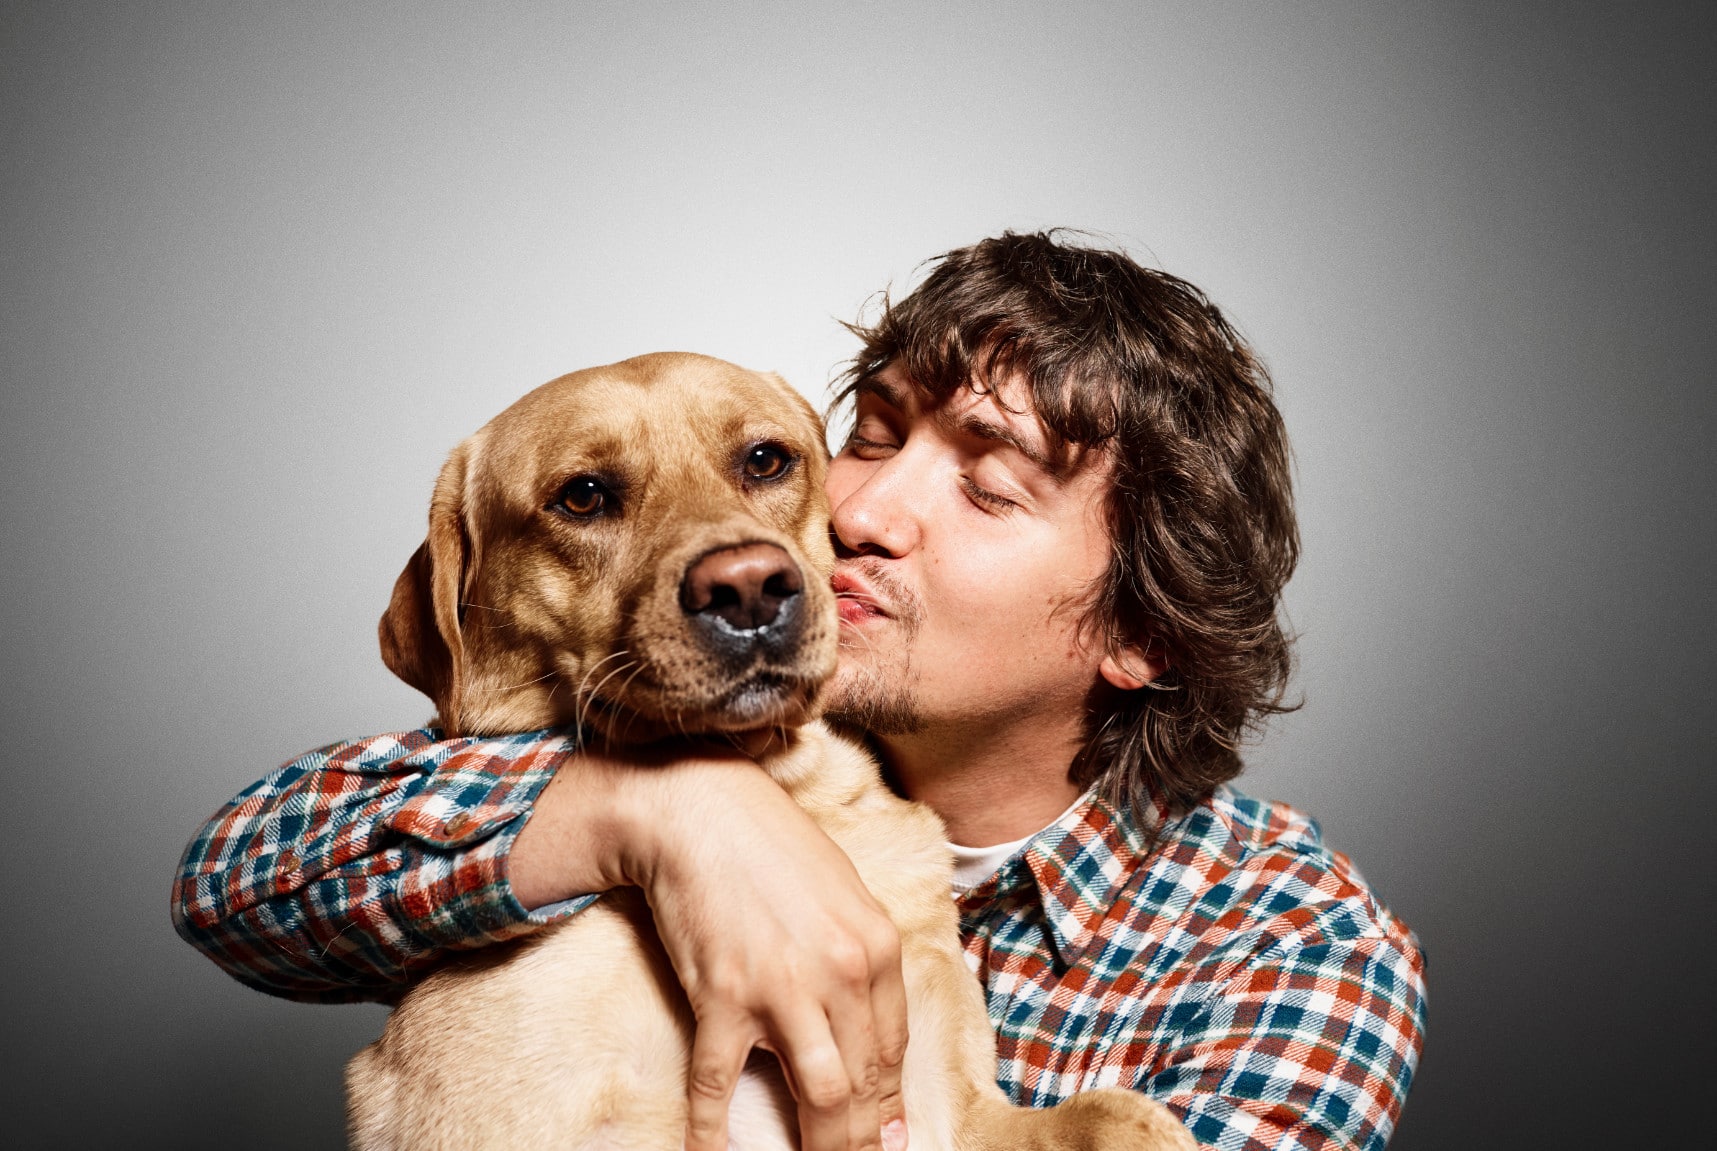 clear uncompressed image of man kissing dog